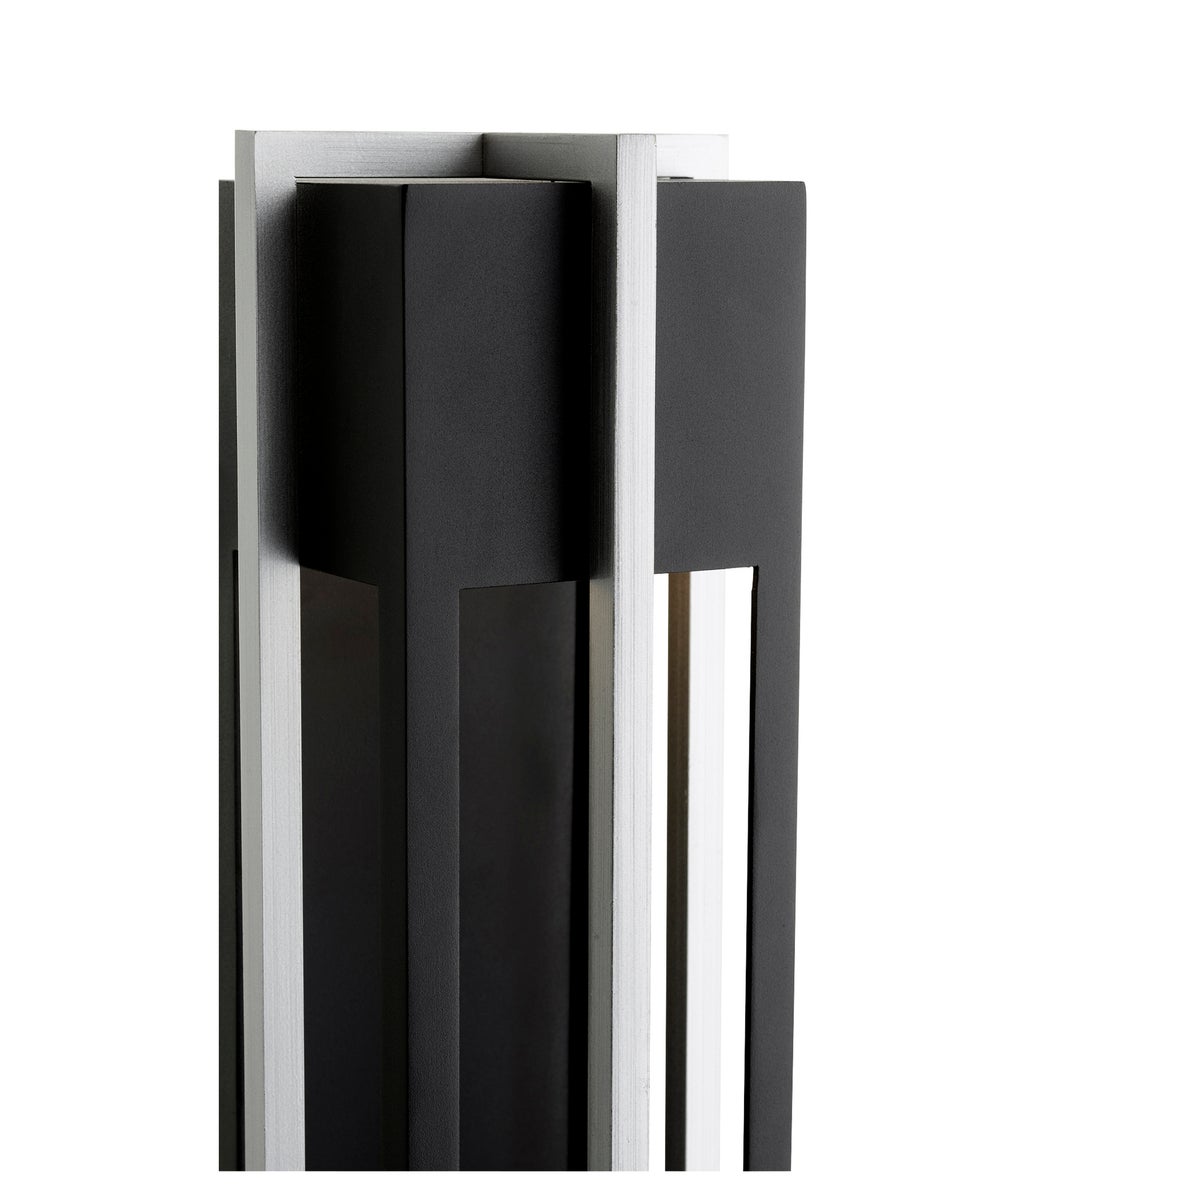 LED Outdoor Wall Light with geometric design and dual-layered frame. Noir/satin nickel finish adds sophistication to any contemporary outdoor setting. Provides guiding light for guests.